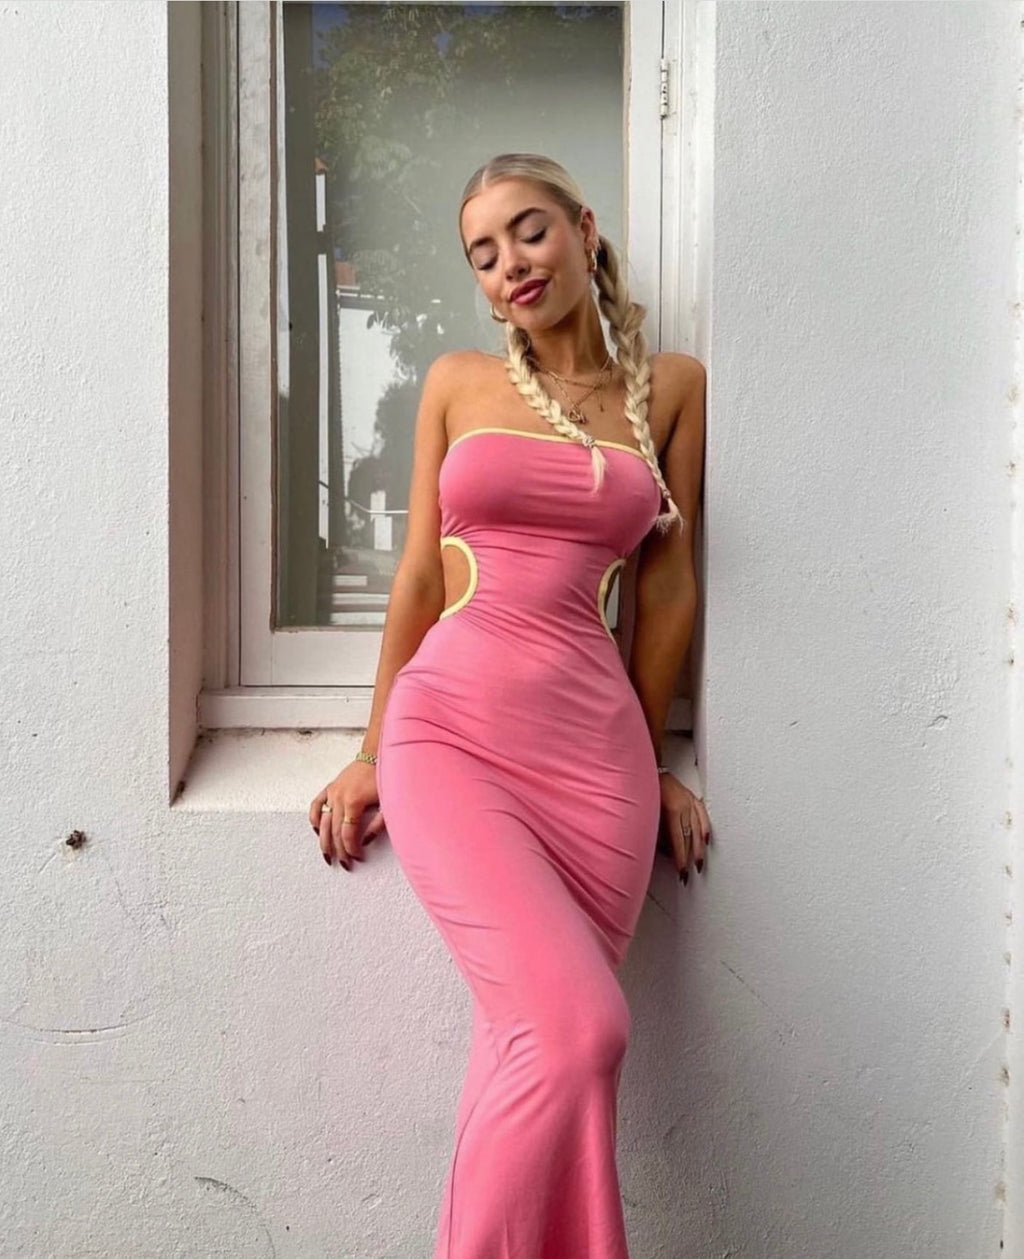 Francis Lola stuns in the Soft Lounge Shimmer Dress & Maternity